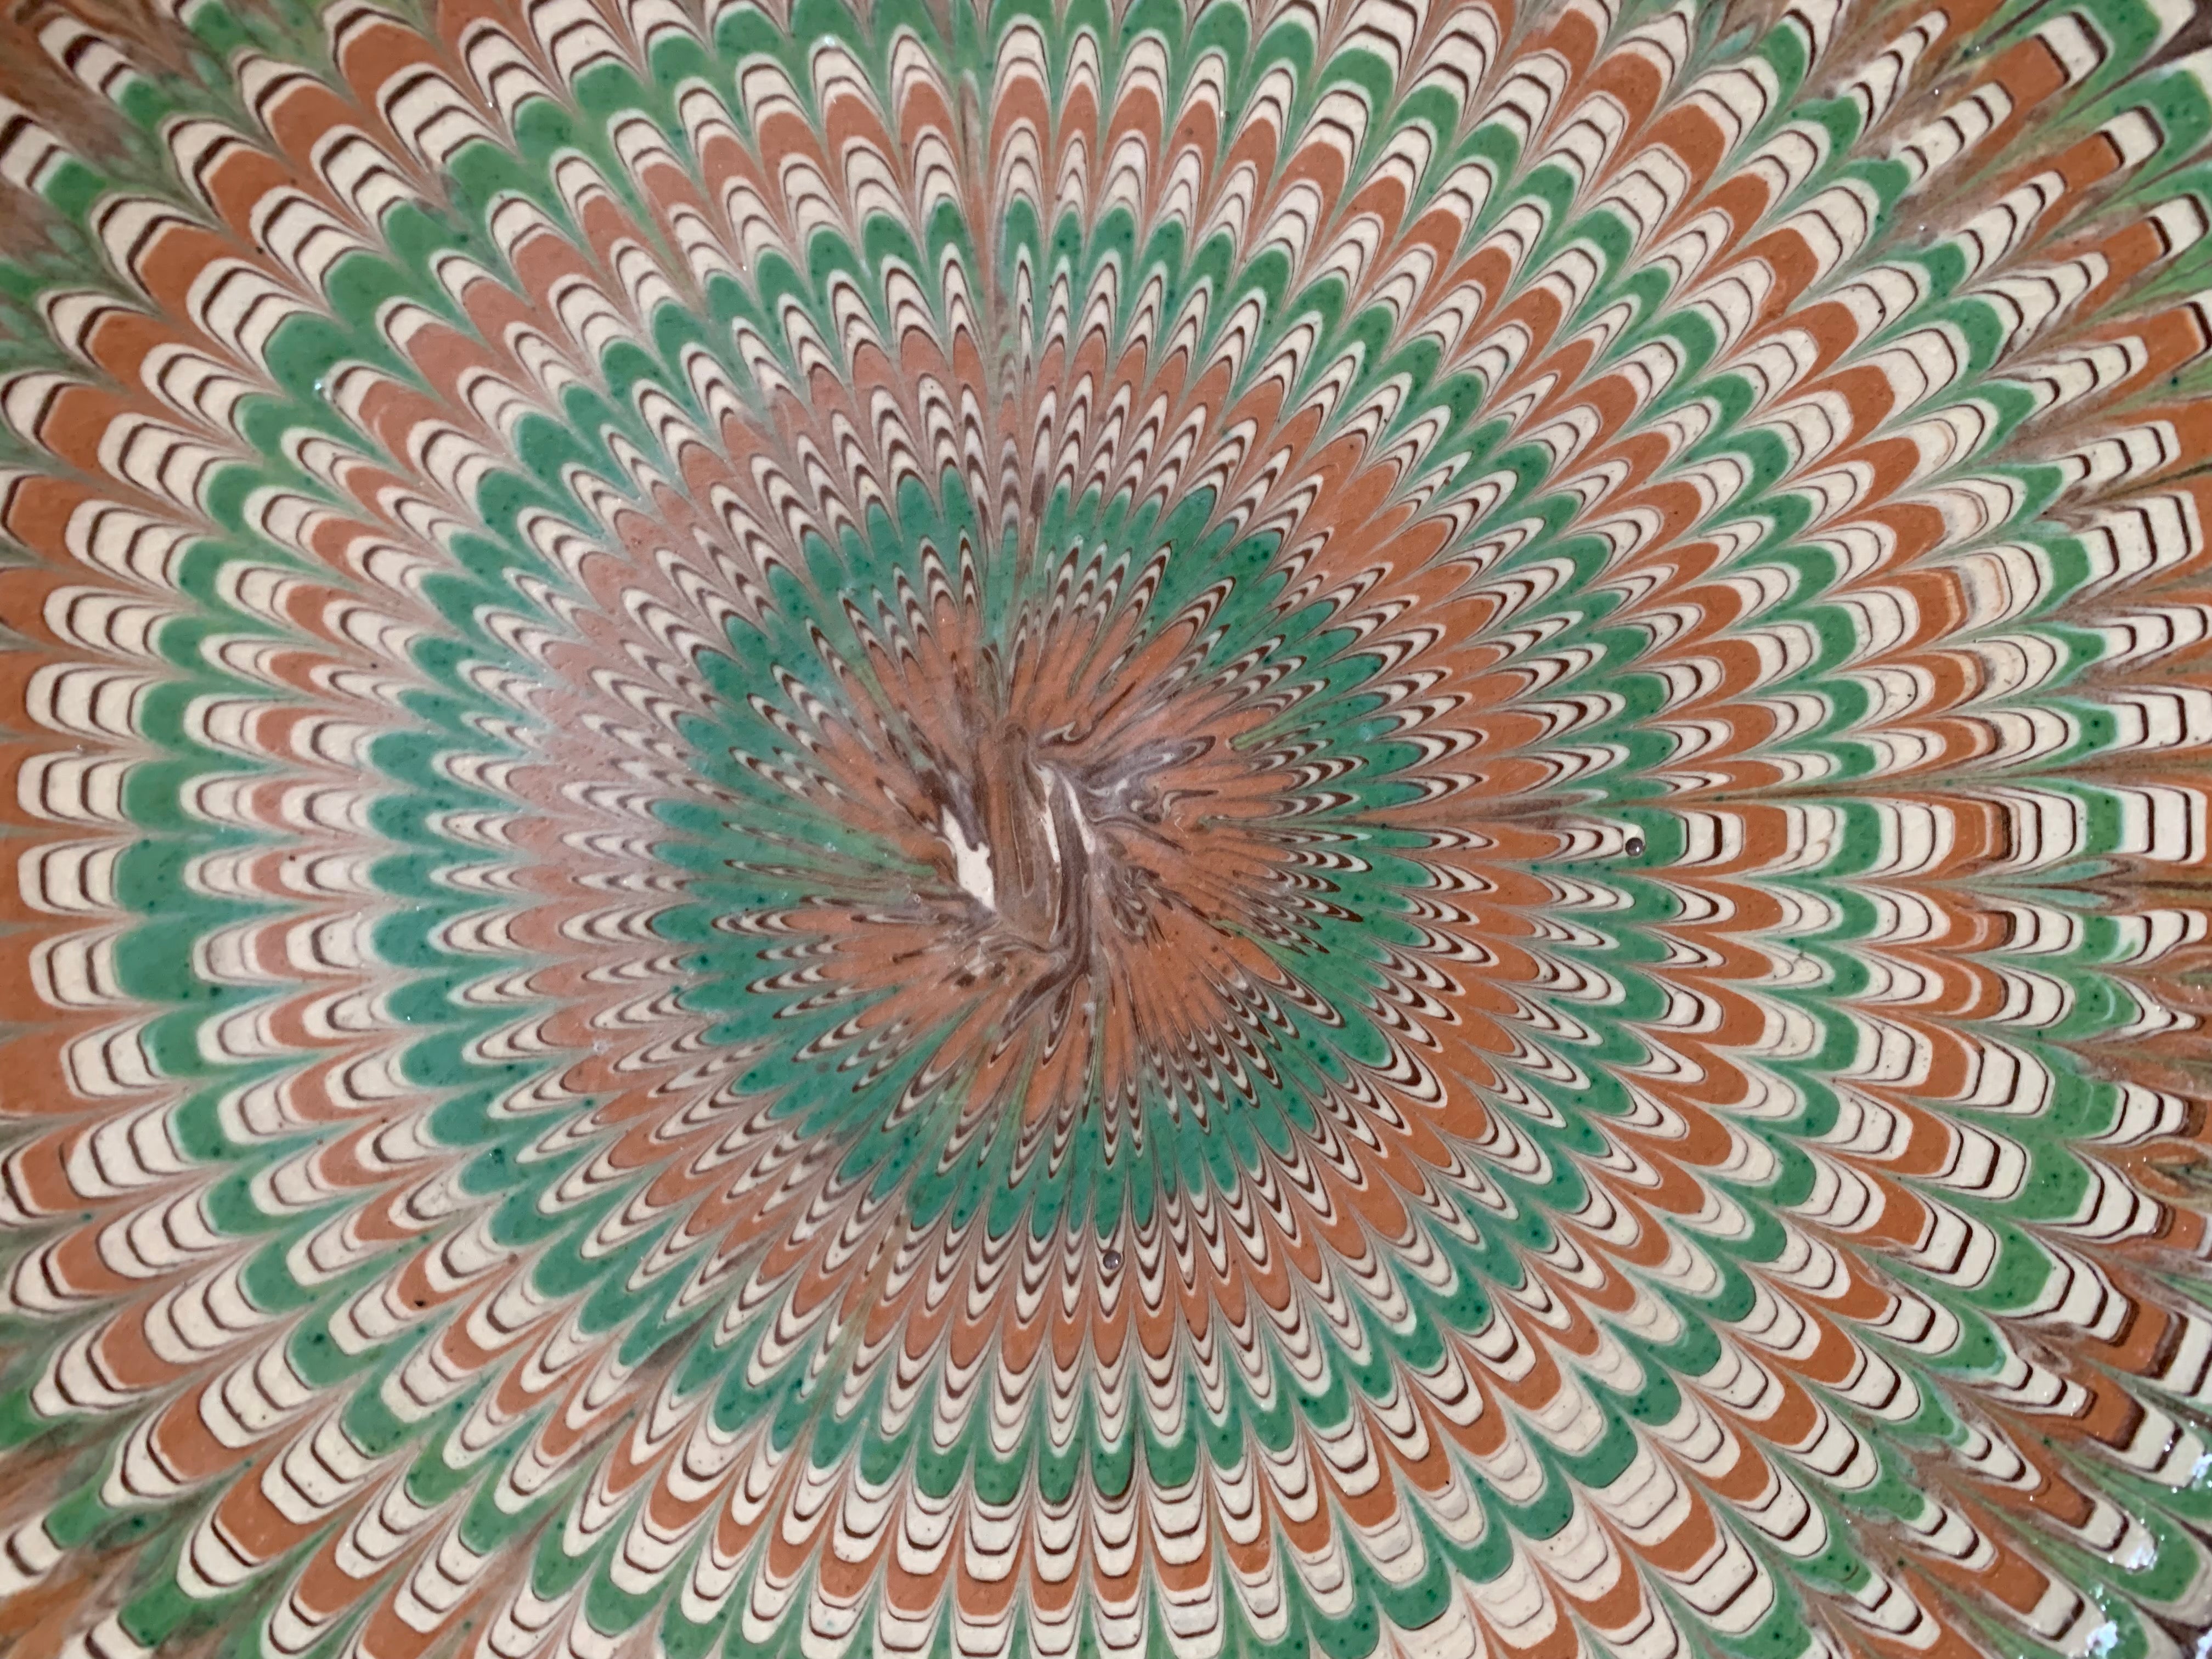 Decorative Patterned Plate in greens and earthy colours